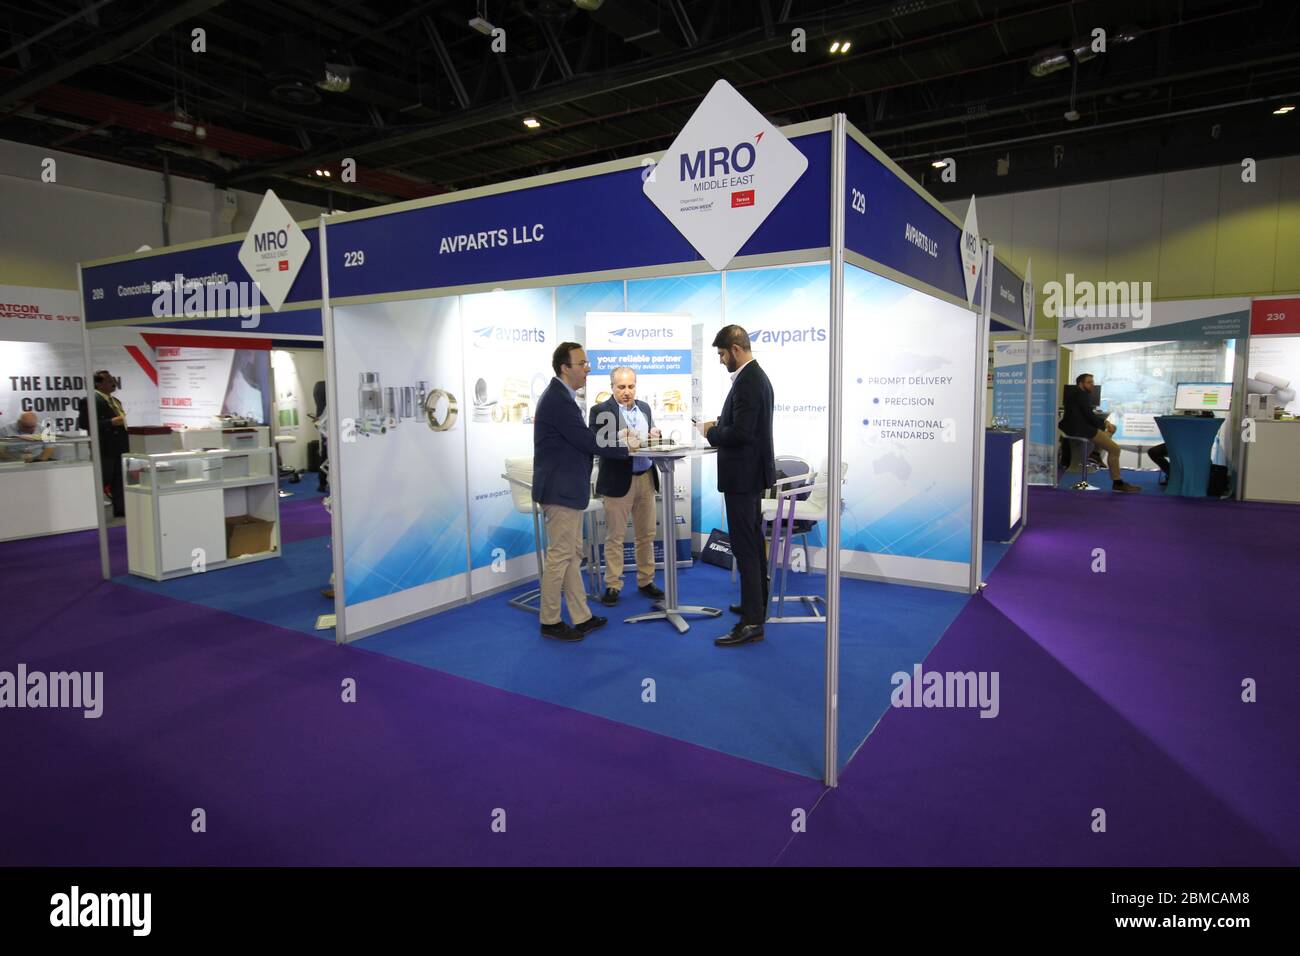 Scene at Aircraft Interiors Middle East 2020 and MRO Middle East 2020 joint trade show held in Dubai, United Arab Emirates, from February 25-26, 2020. Stock Photo